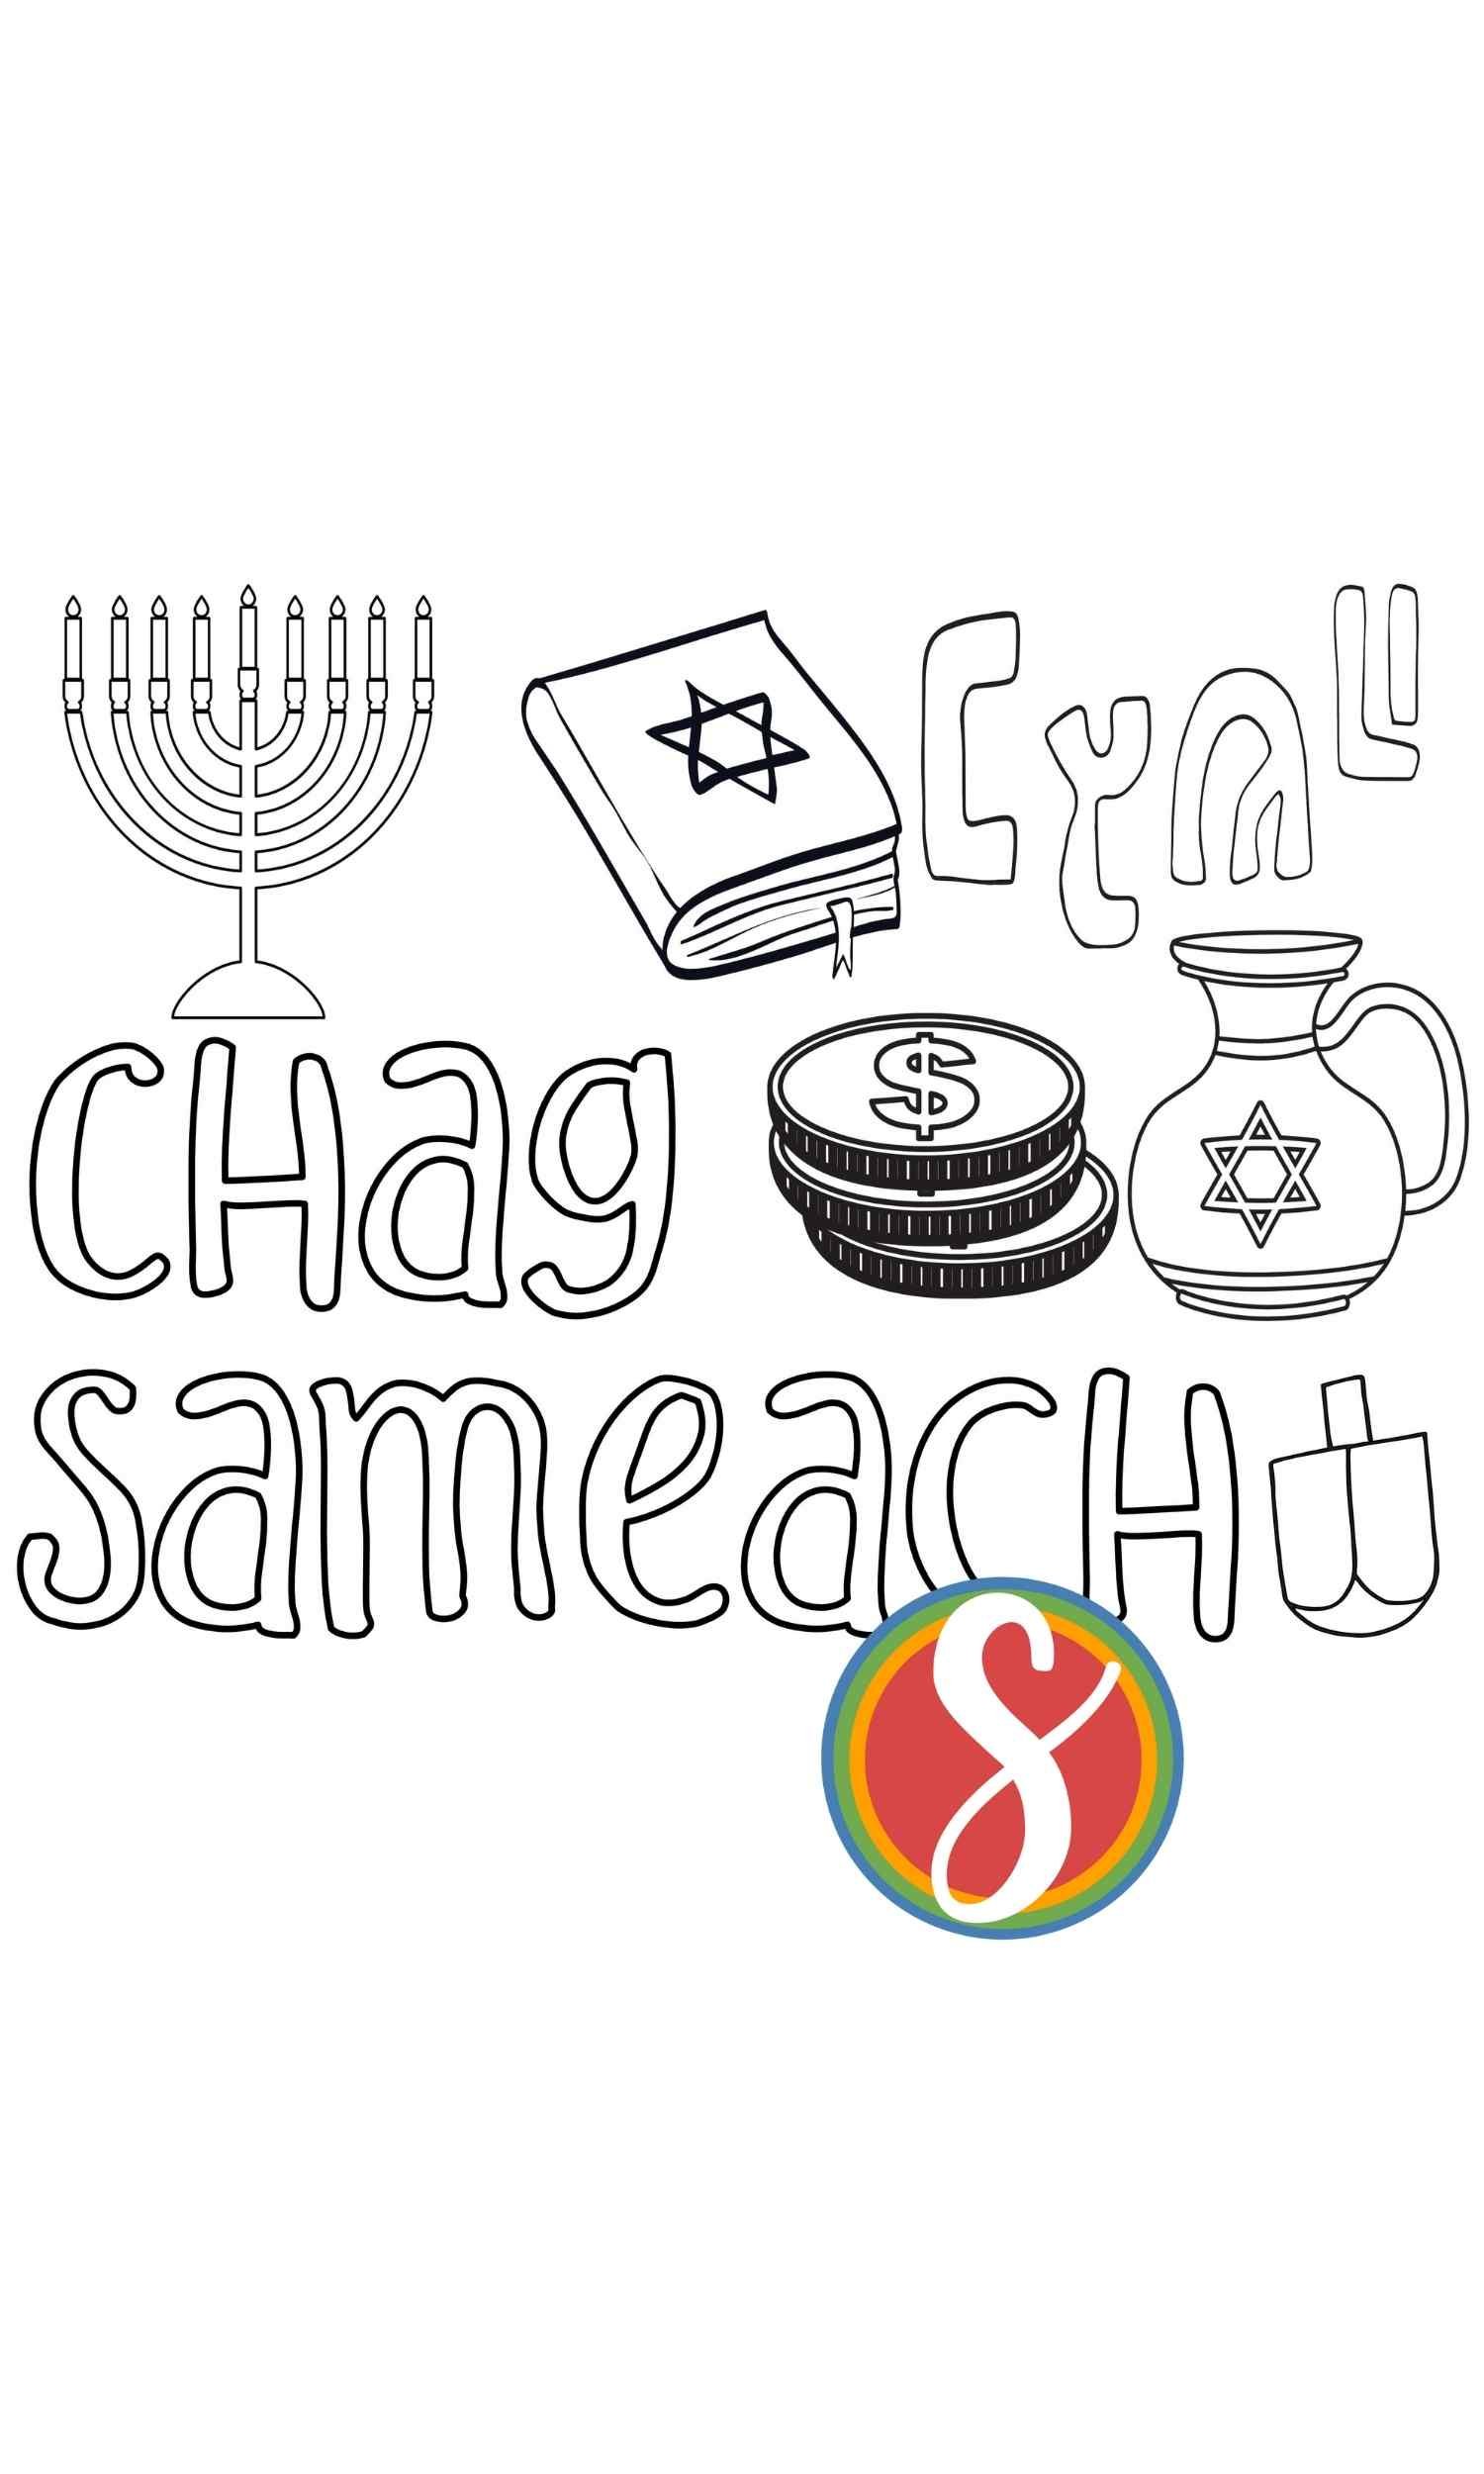 chag sameach coloring page with hanukkah elements to color